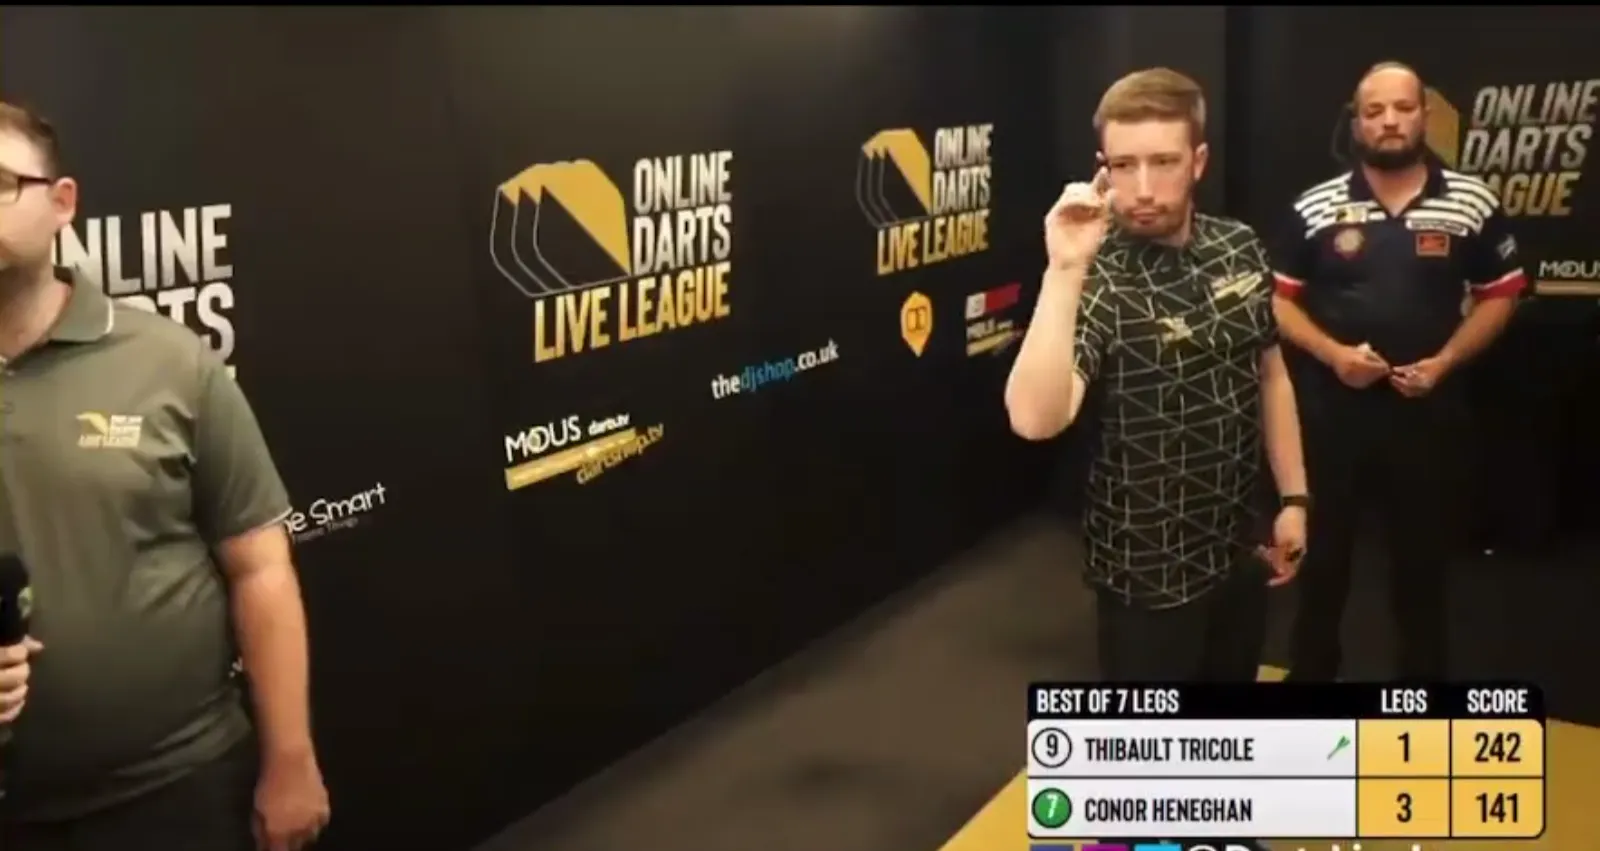 2022 07 02 23 59 09 live darts on twitter 9 conor heneghan hits his first 62c0bff823db9